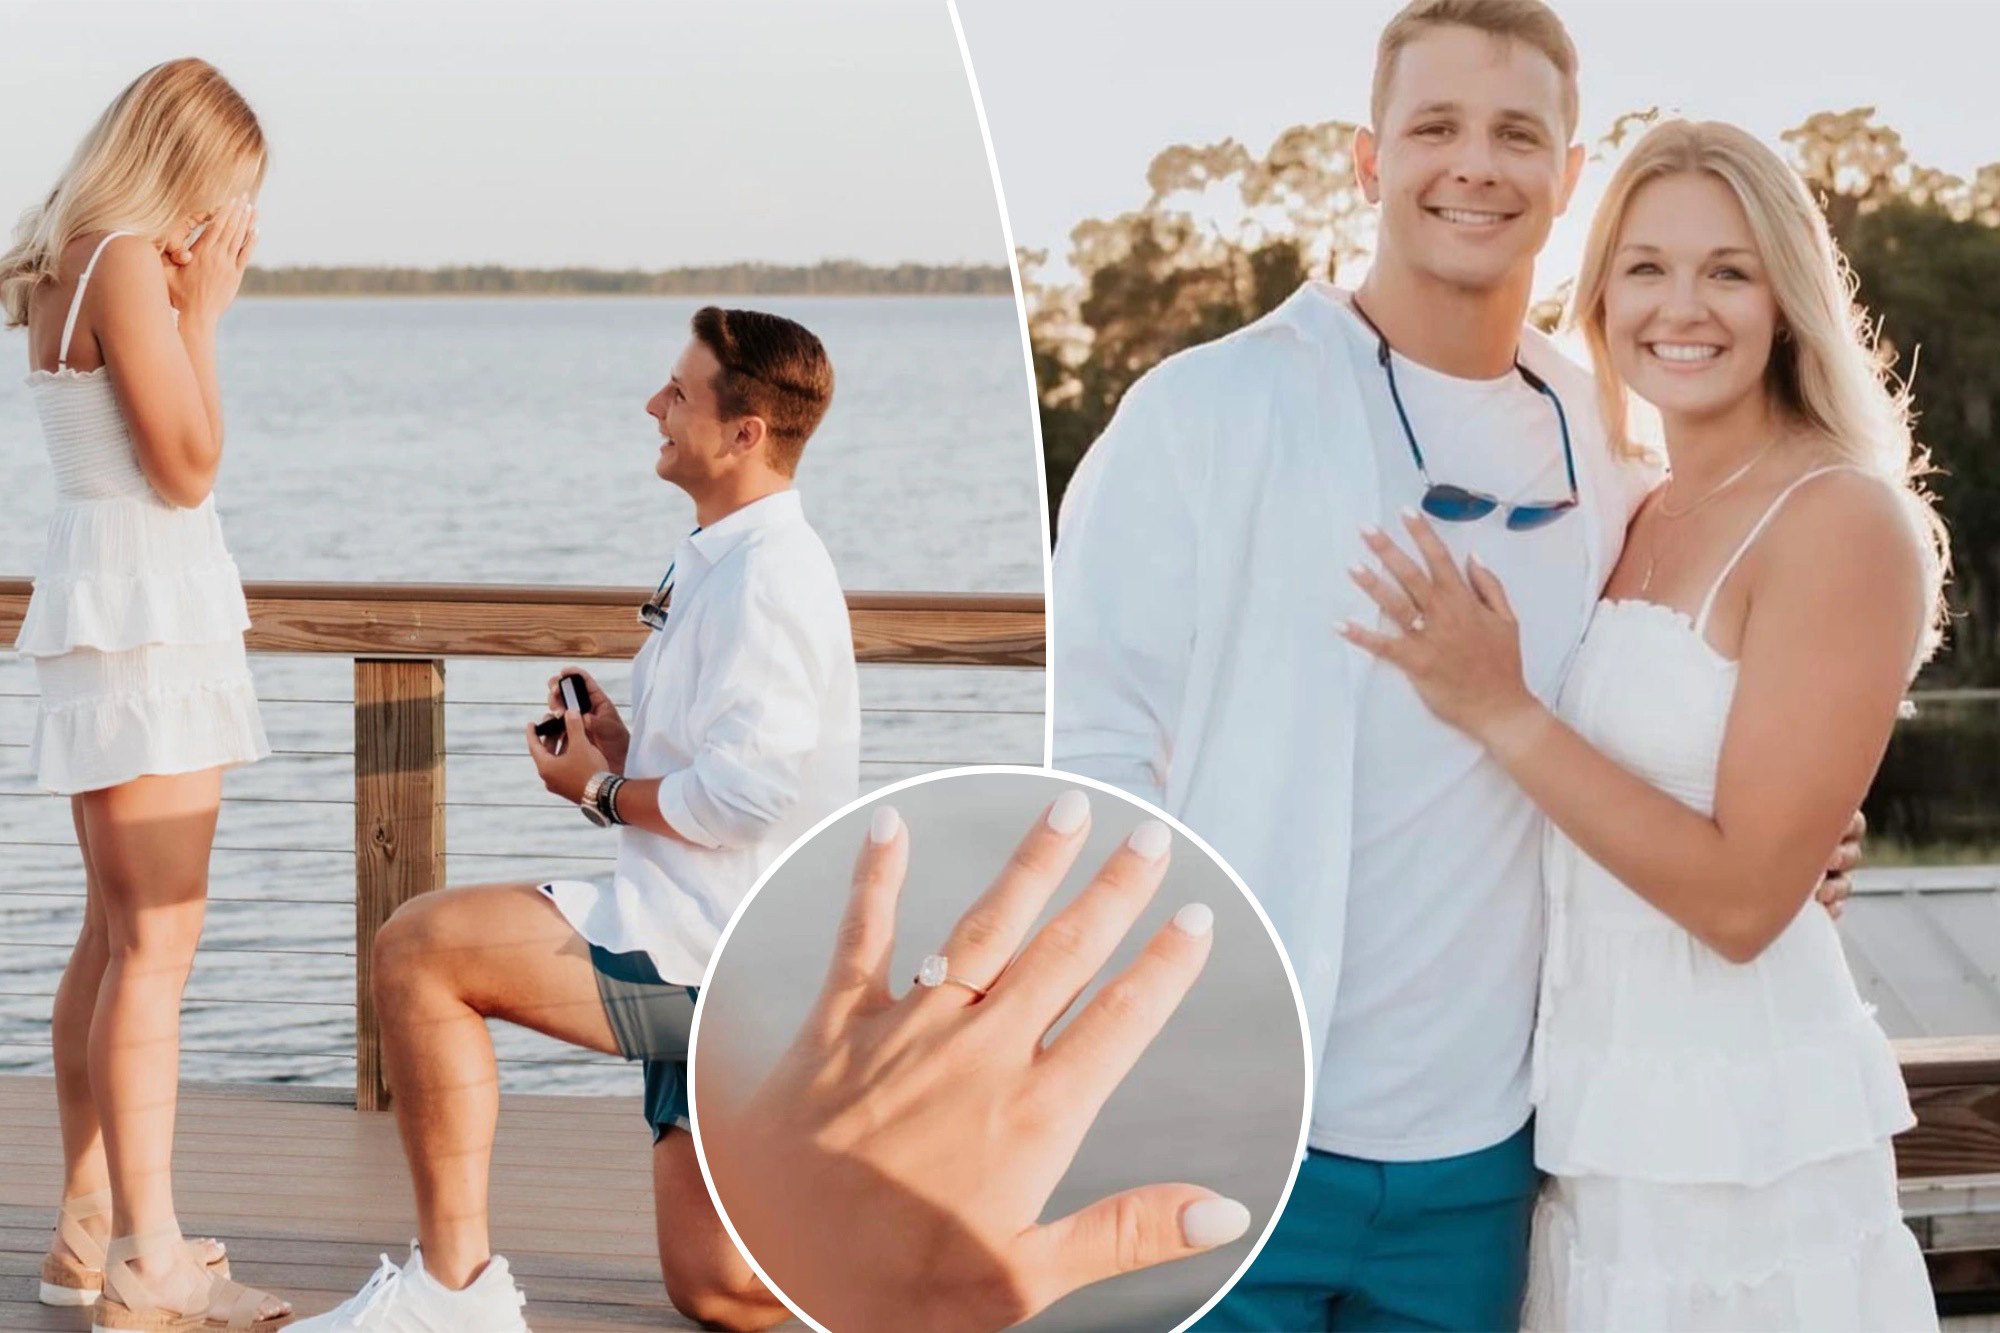 49ers Qb Brock Purdy Gets Engaged To Girlfriend Jenna Brandt ‘here S To Forever